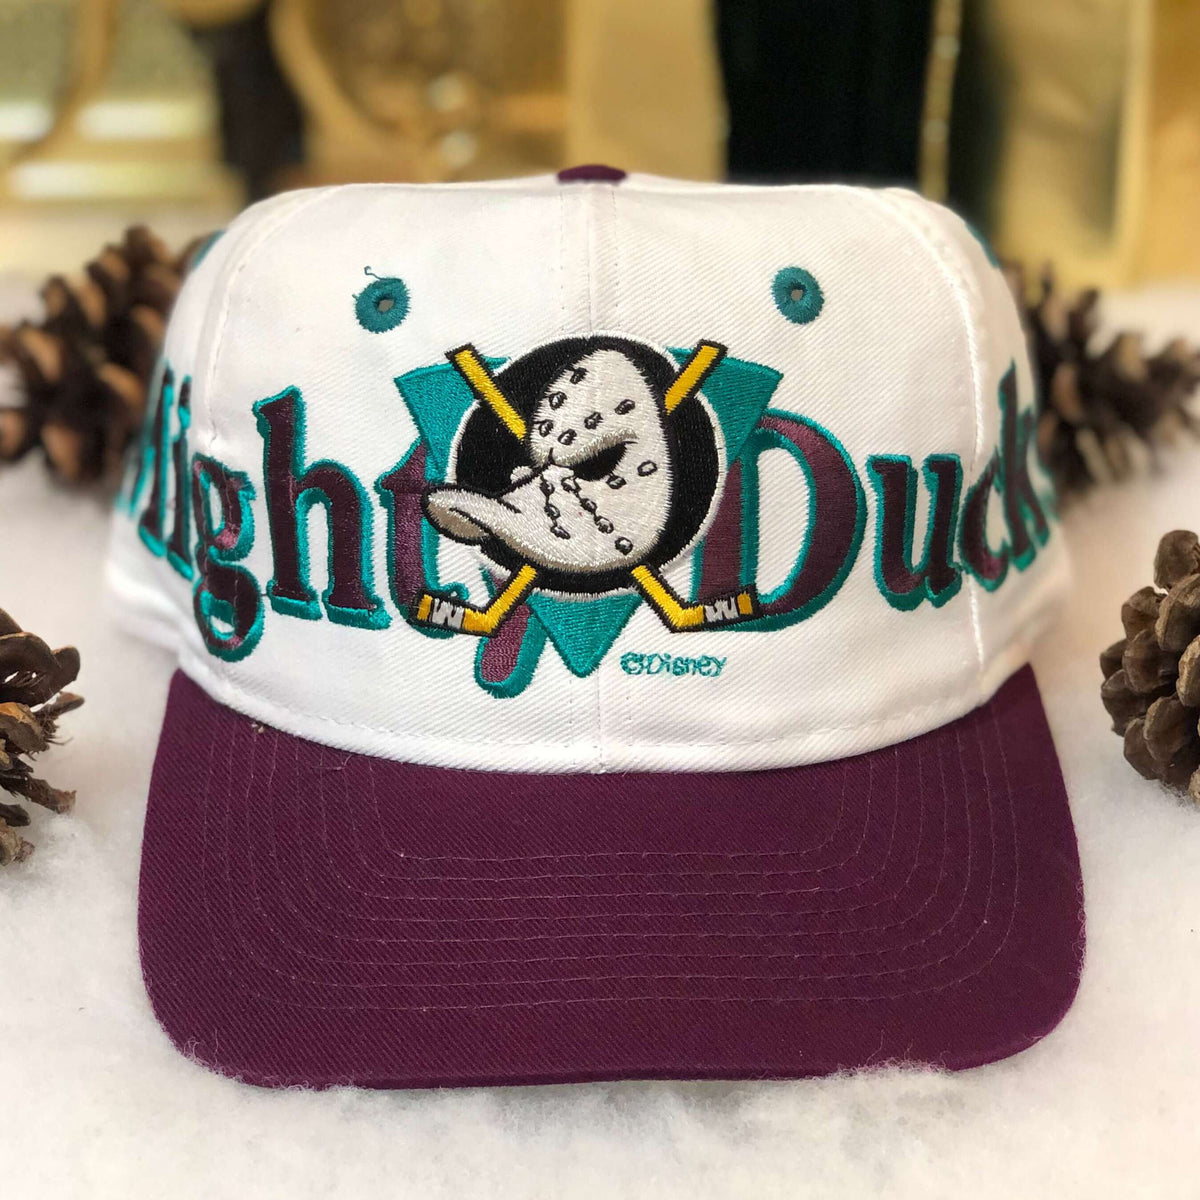 NWT Vintage Mighty Ducks Fitted Hat 